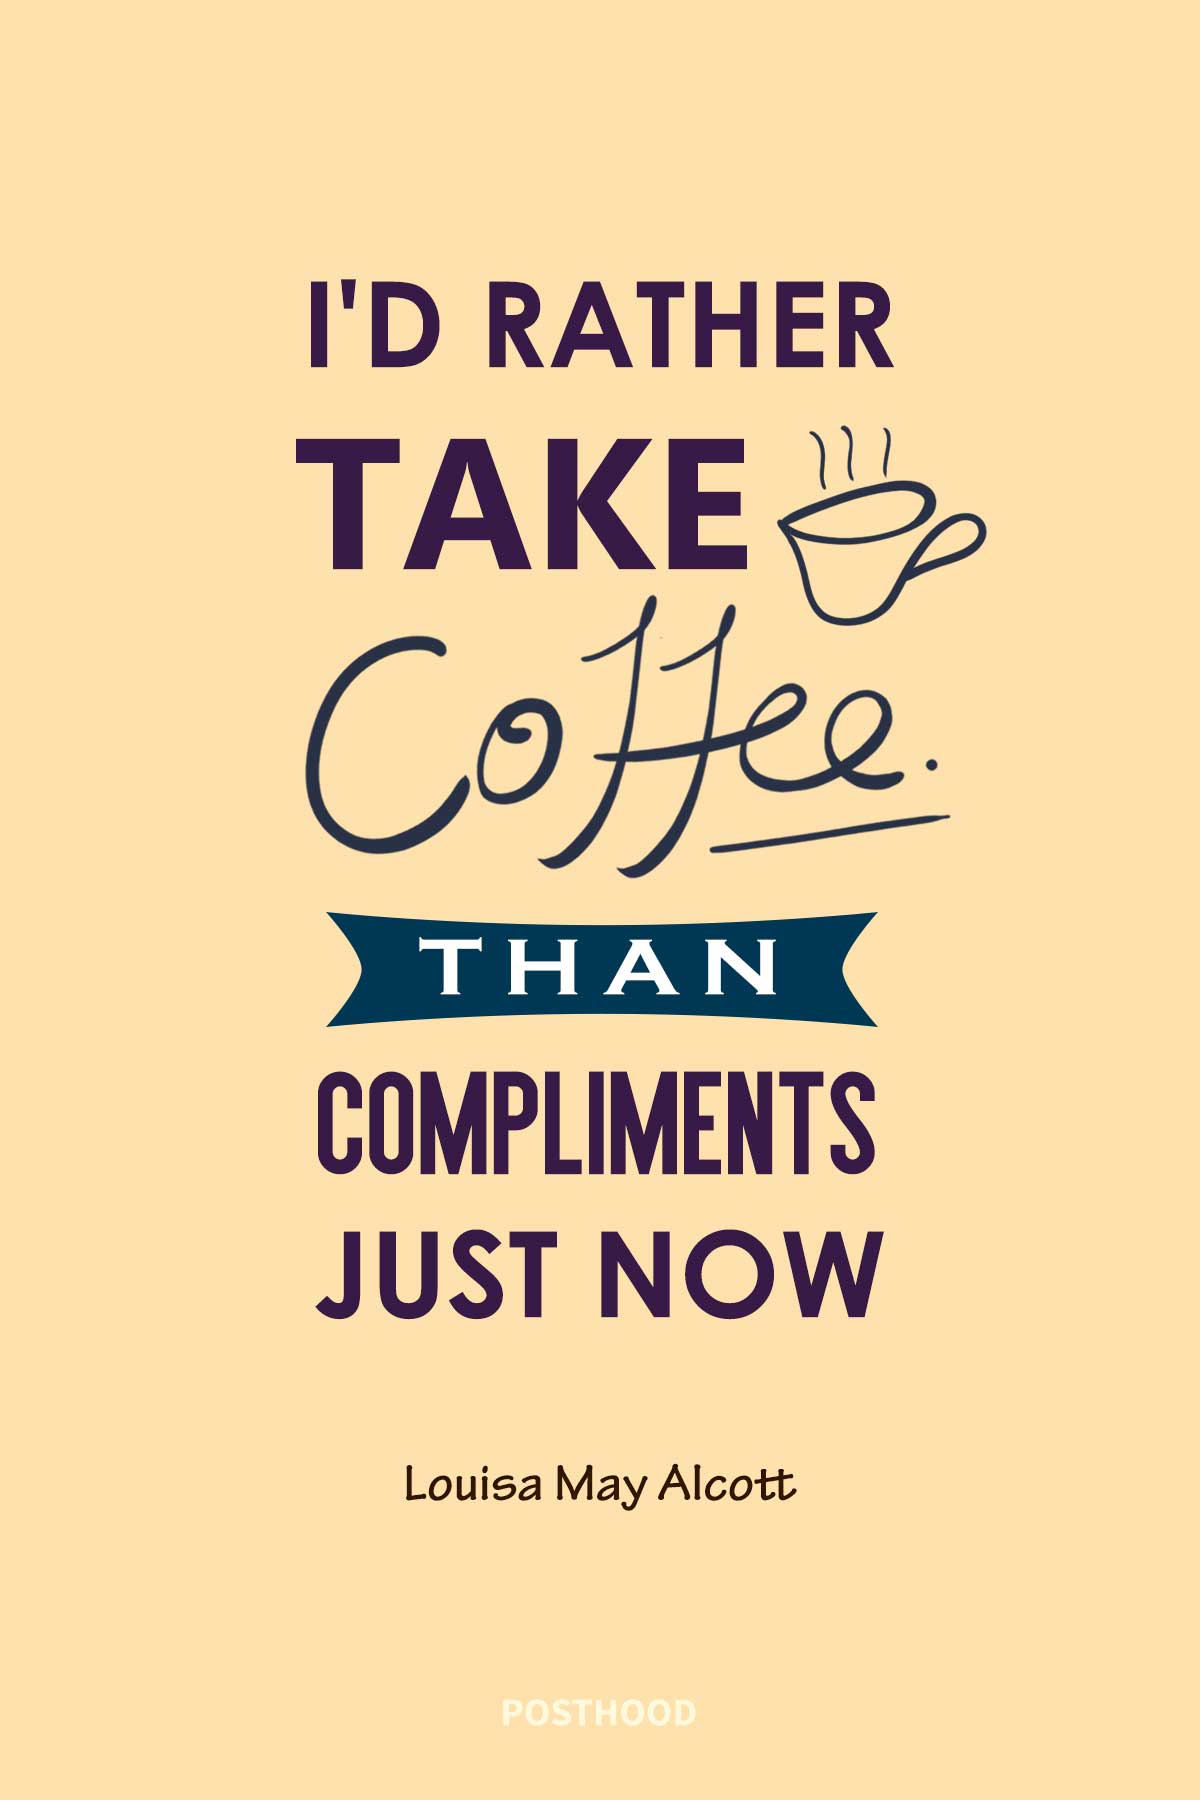 80 Fun and love coffee quotes that will express your immense love for coffee. Cheer up your coffee attitude with these humorous coffee quotes.